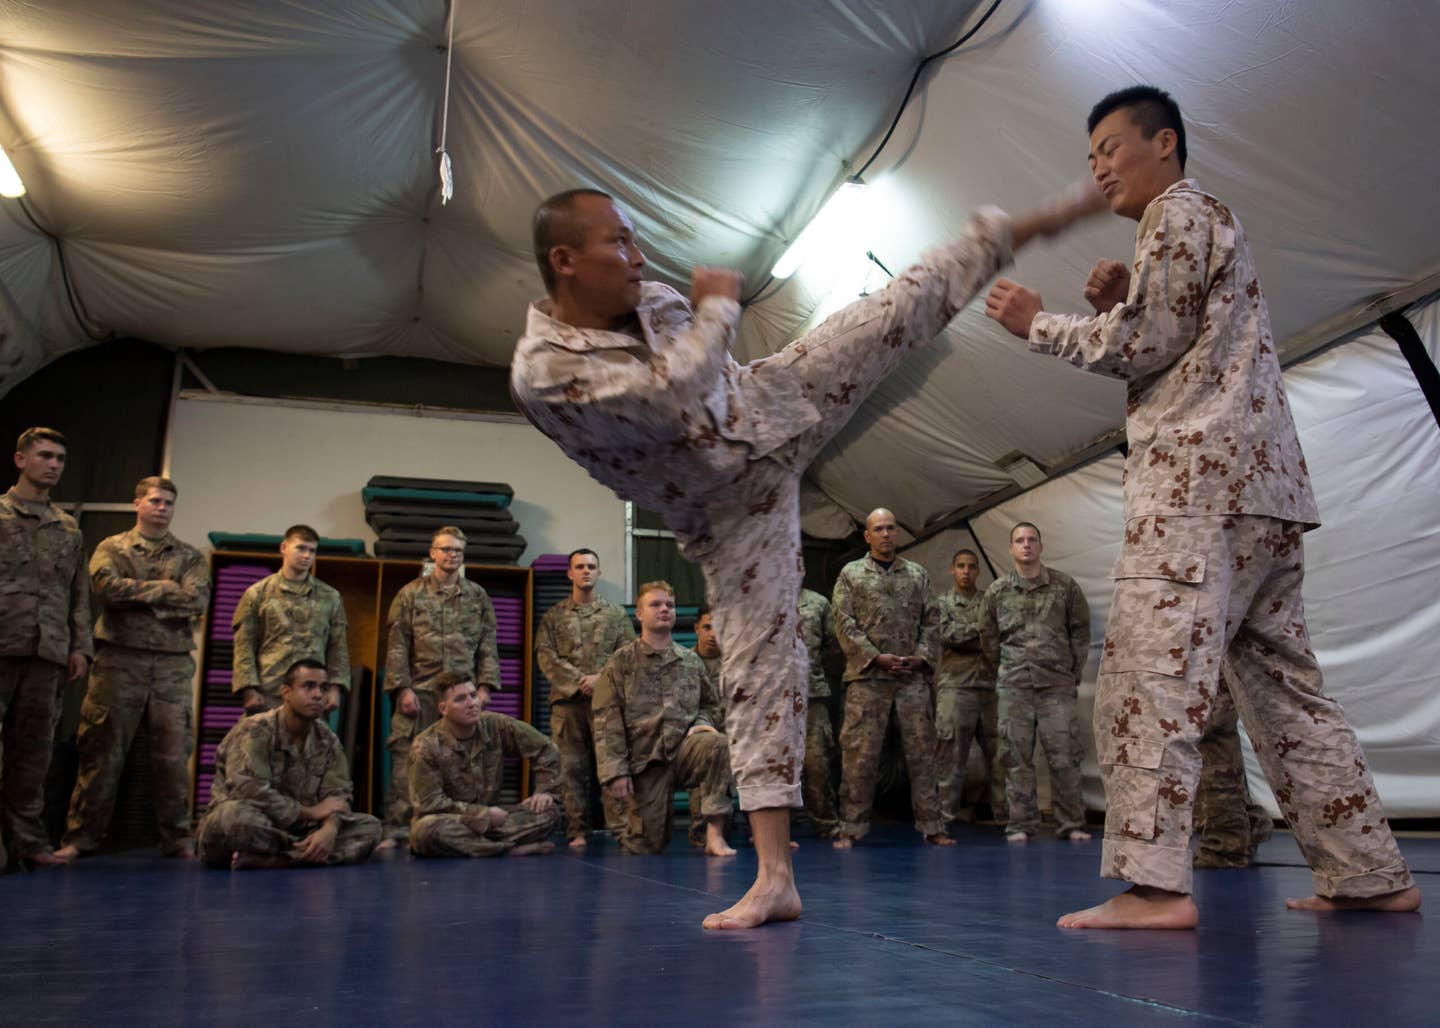 Japanese Ground Self-Defense Force Command Sgt. Maj. Kentaro Nakazato, command sergeant major of the 16th infantry regiment company, demonstrates head kick form during a combatives exchange with Combined Joint Task Force-Horn of Africa. (U.S. Air Force photo by Staff Sgt. J.D. Strong II)